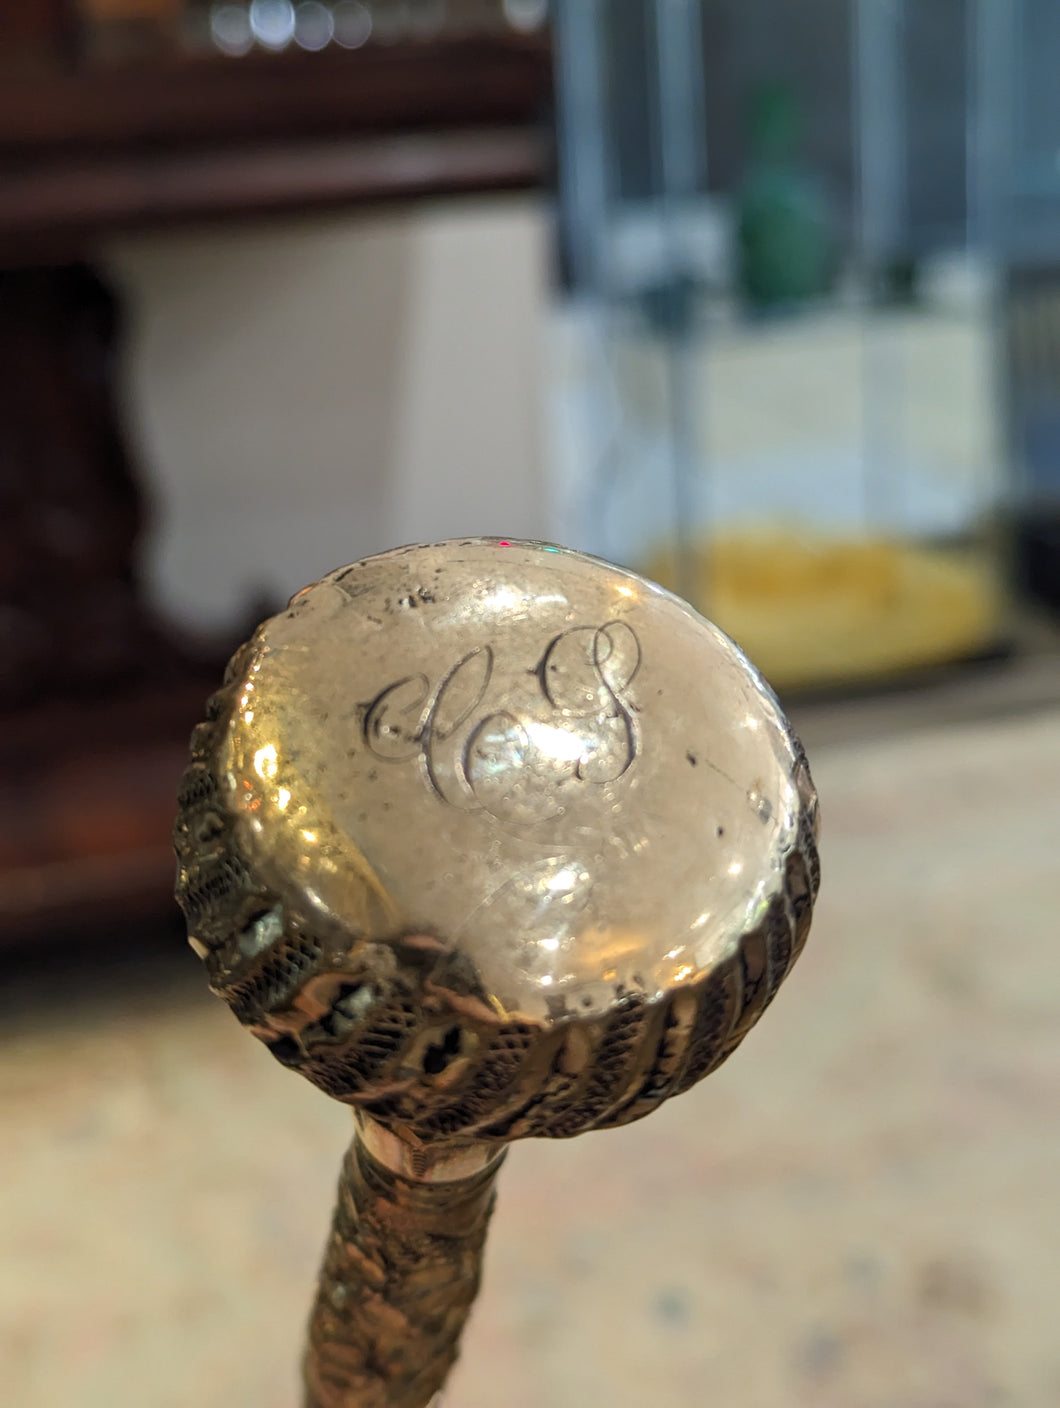 Wooden Walking Cane with Monogrammed Brass Knob Top